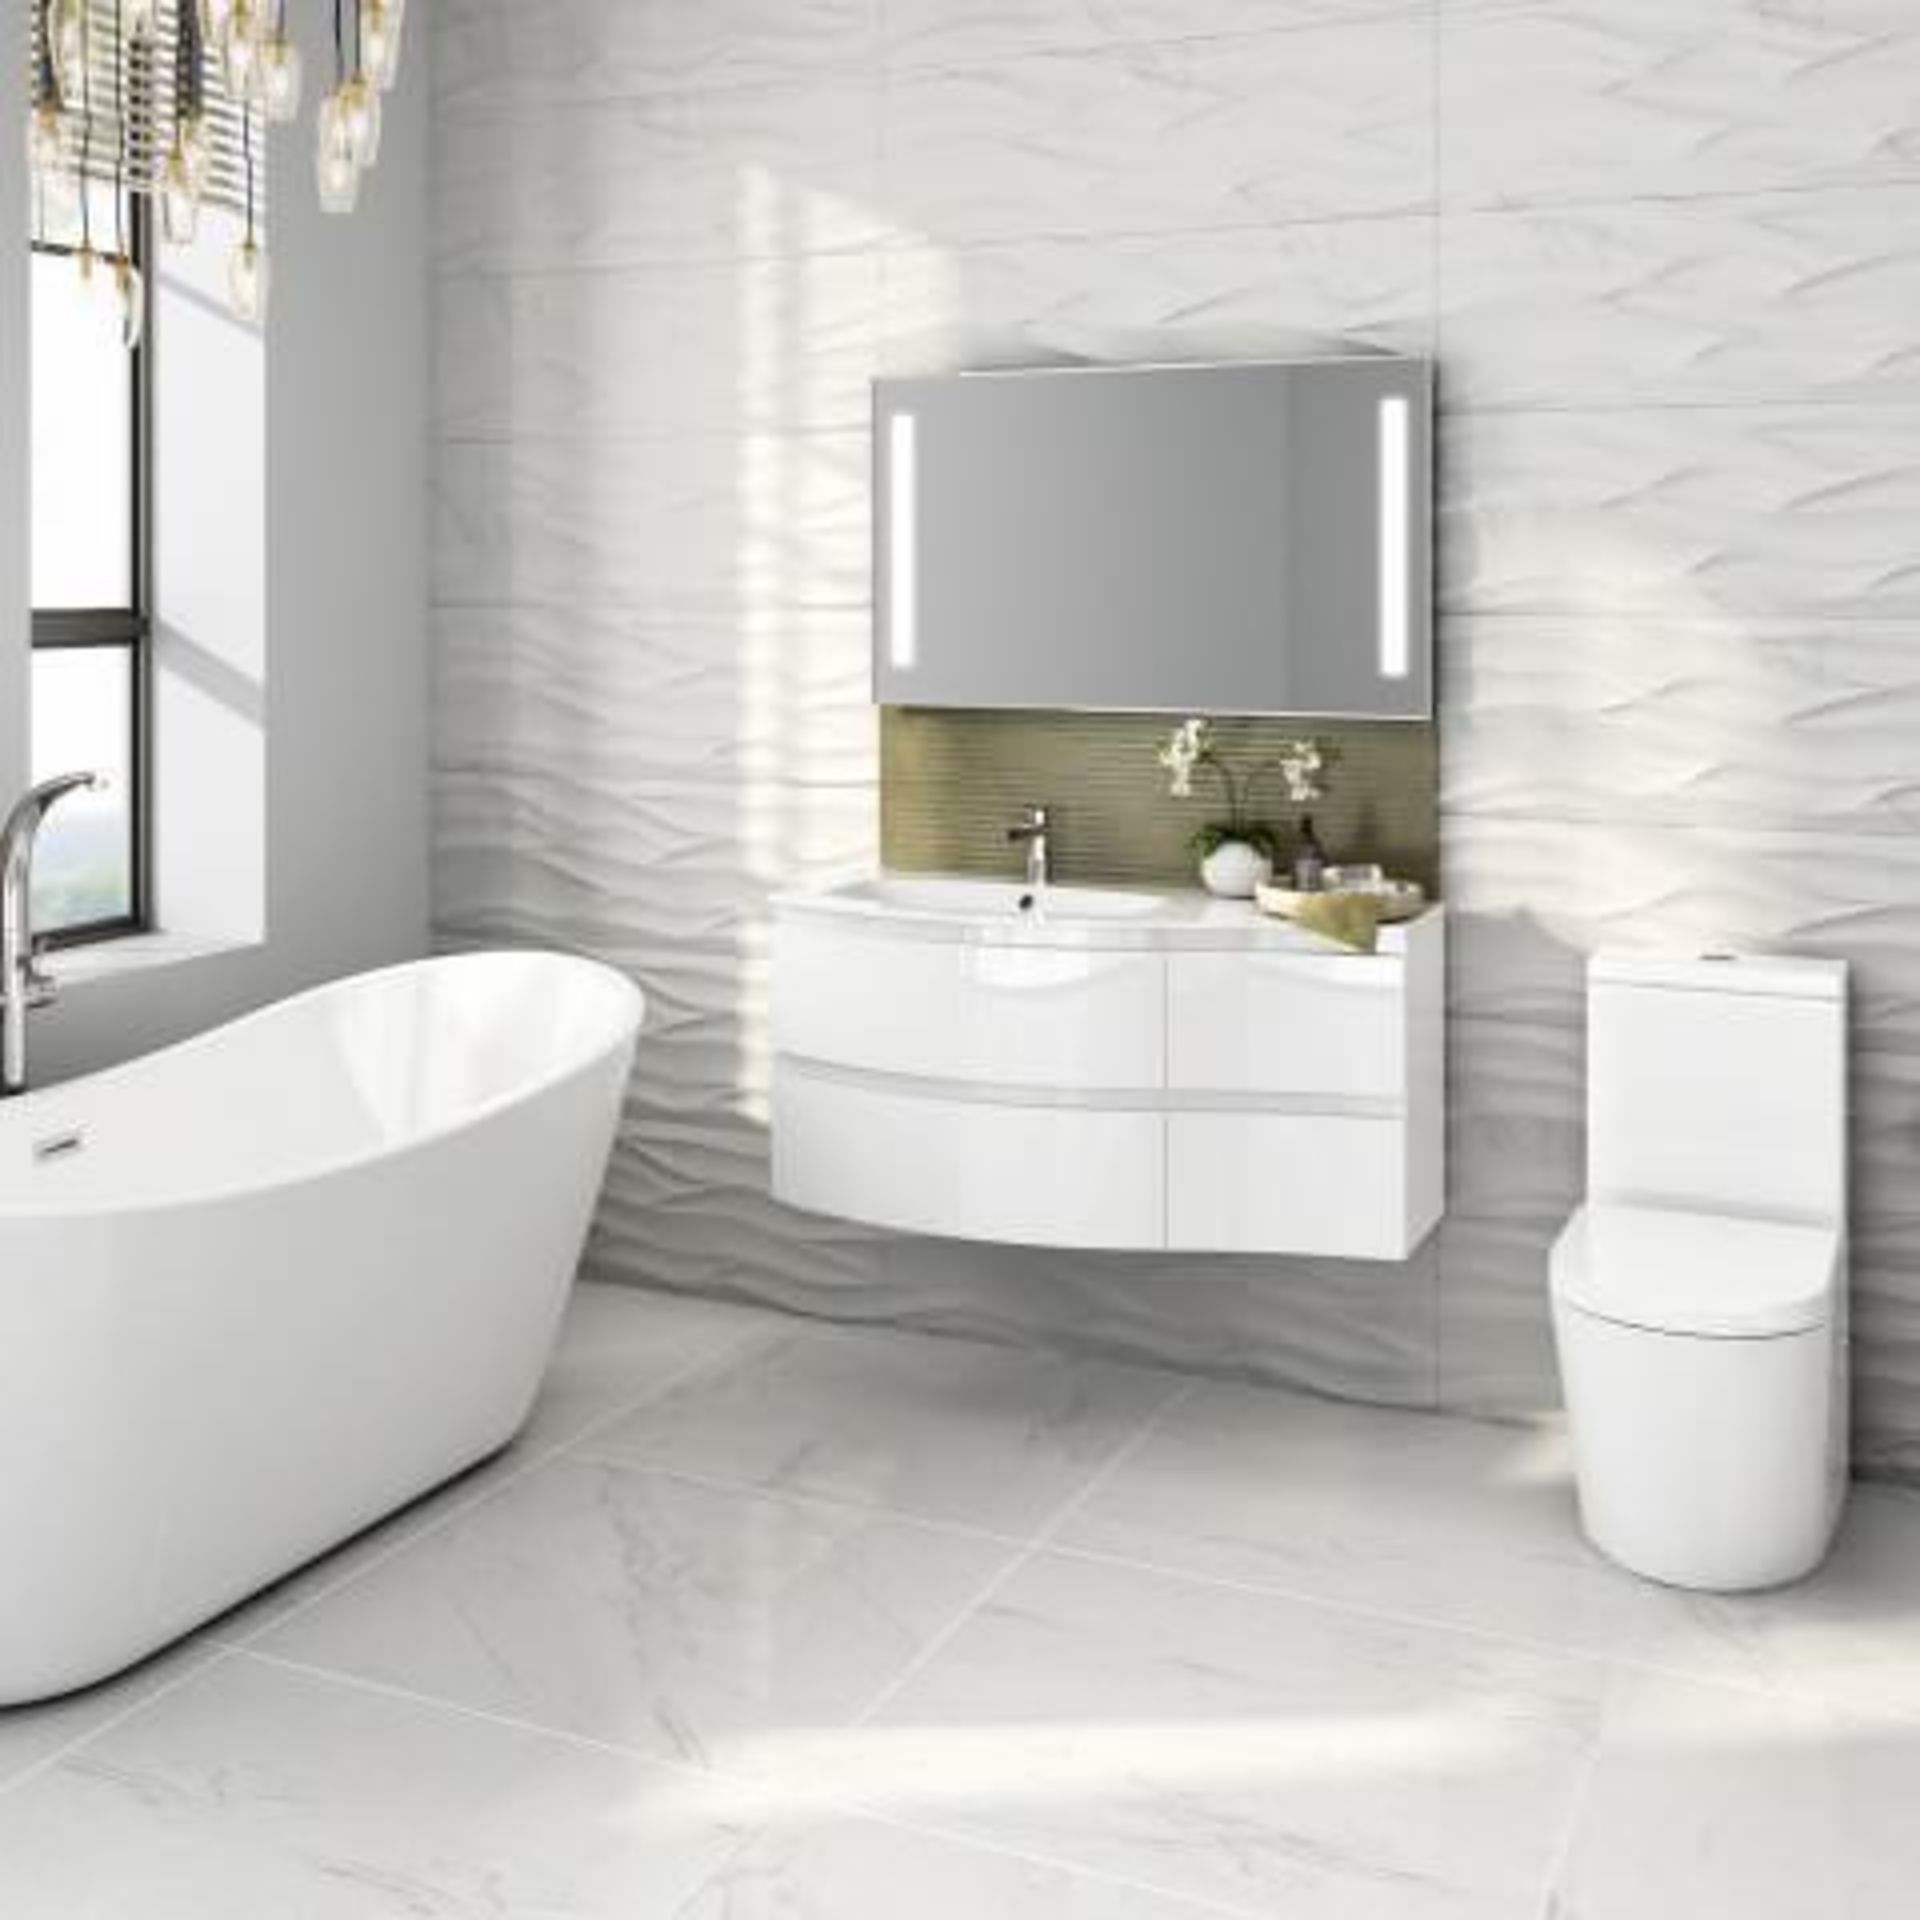 (W318) 1040mm Amelie High Gloss White Curved Vanity Unit - Left Hand - Wall Hung. RRP £1,249. - Image 3 of 4